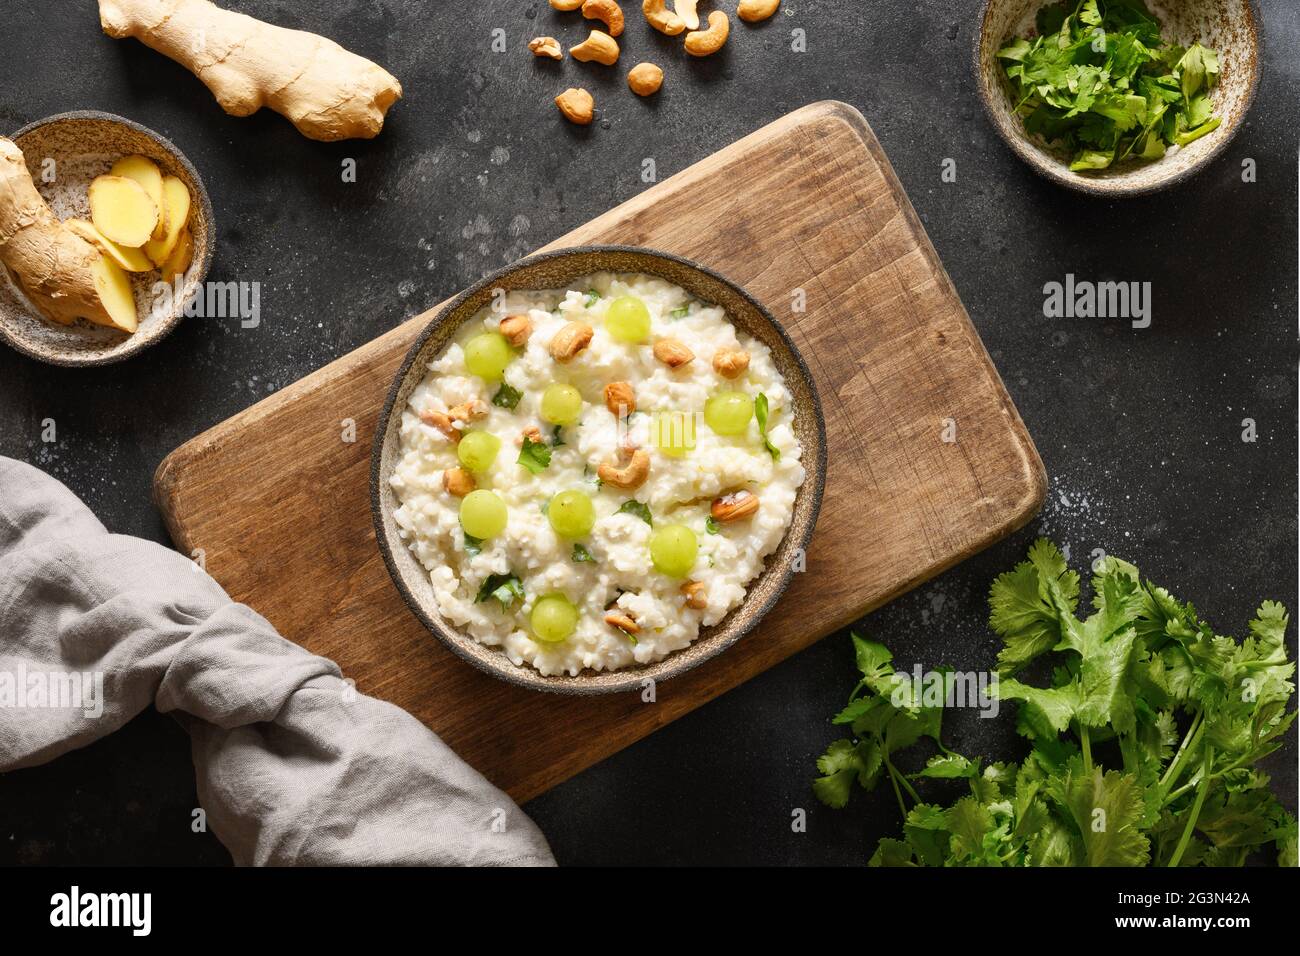 Homemade Curd Rice with pomegranate, cilantro, ginger on a black background. View from above. Indian South ayurvedic cuisine. Stock Photo